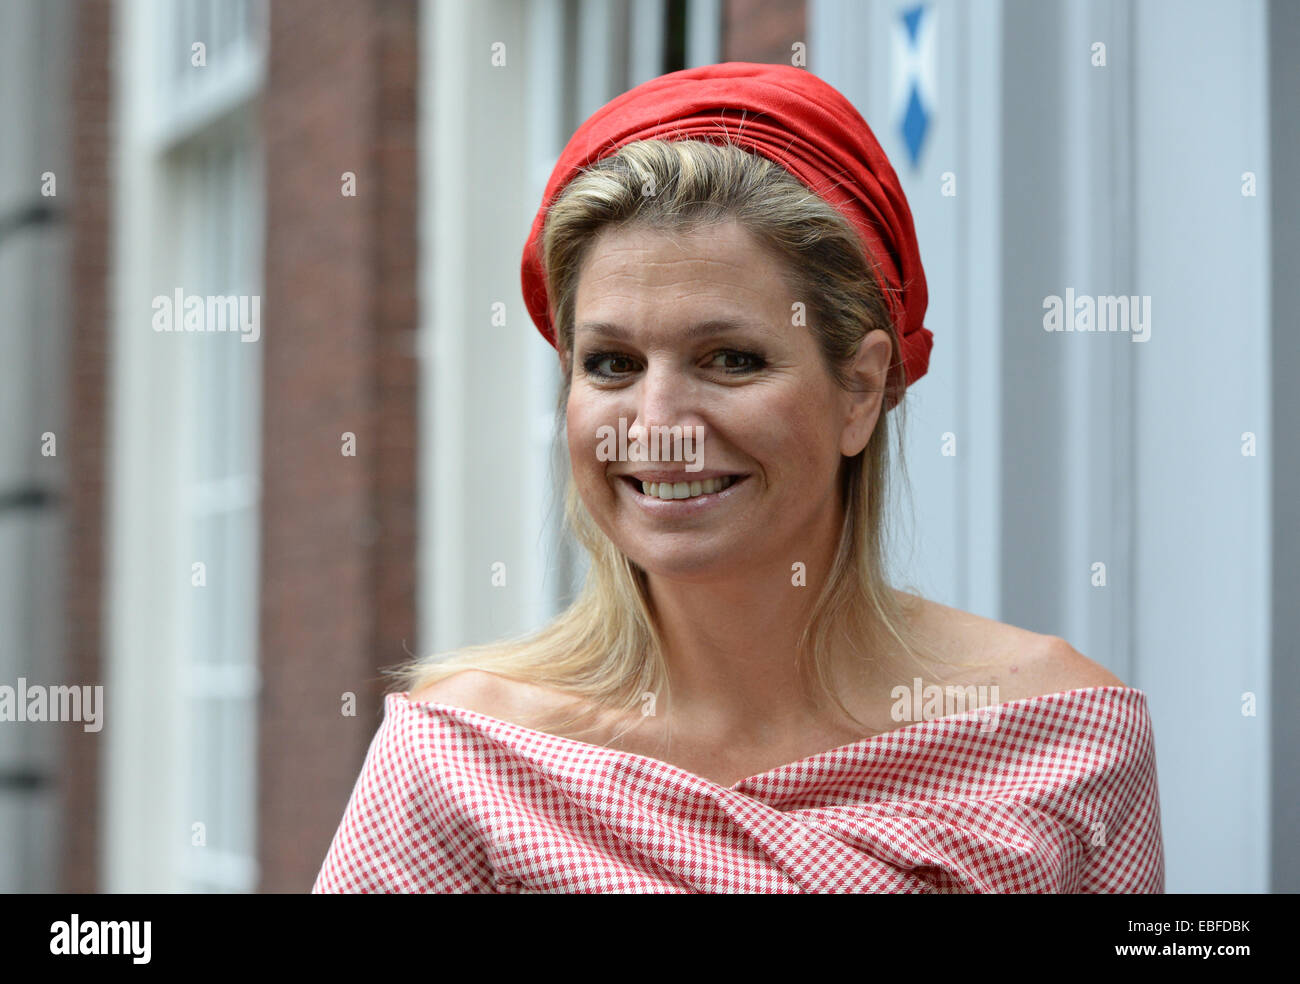 Queen Maxima of the Netherlands attending World MS Day (World Multiple Sclerosis Day) of MS Research Foundation. She received the first copy of the Dutch edition of the International World MS Atlas.  Featuring: Queen Maxima of the Netherlands Where: Voorschoten, Netherlands When: 28 May 2014 Stock Photo